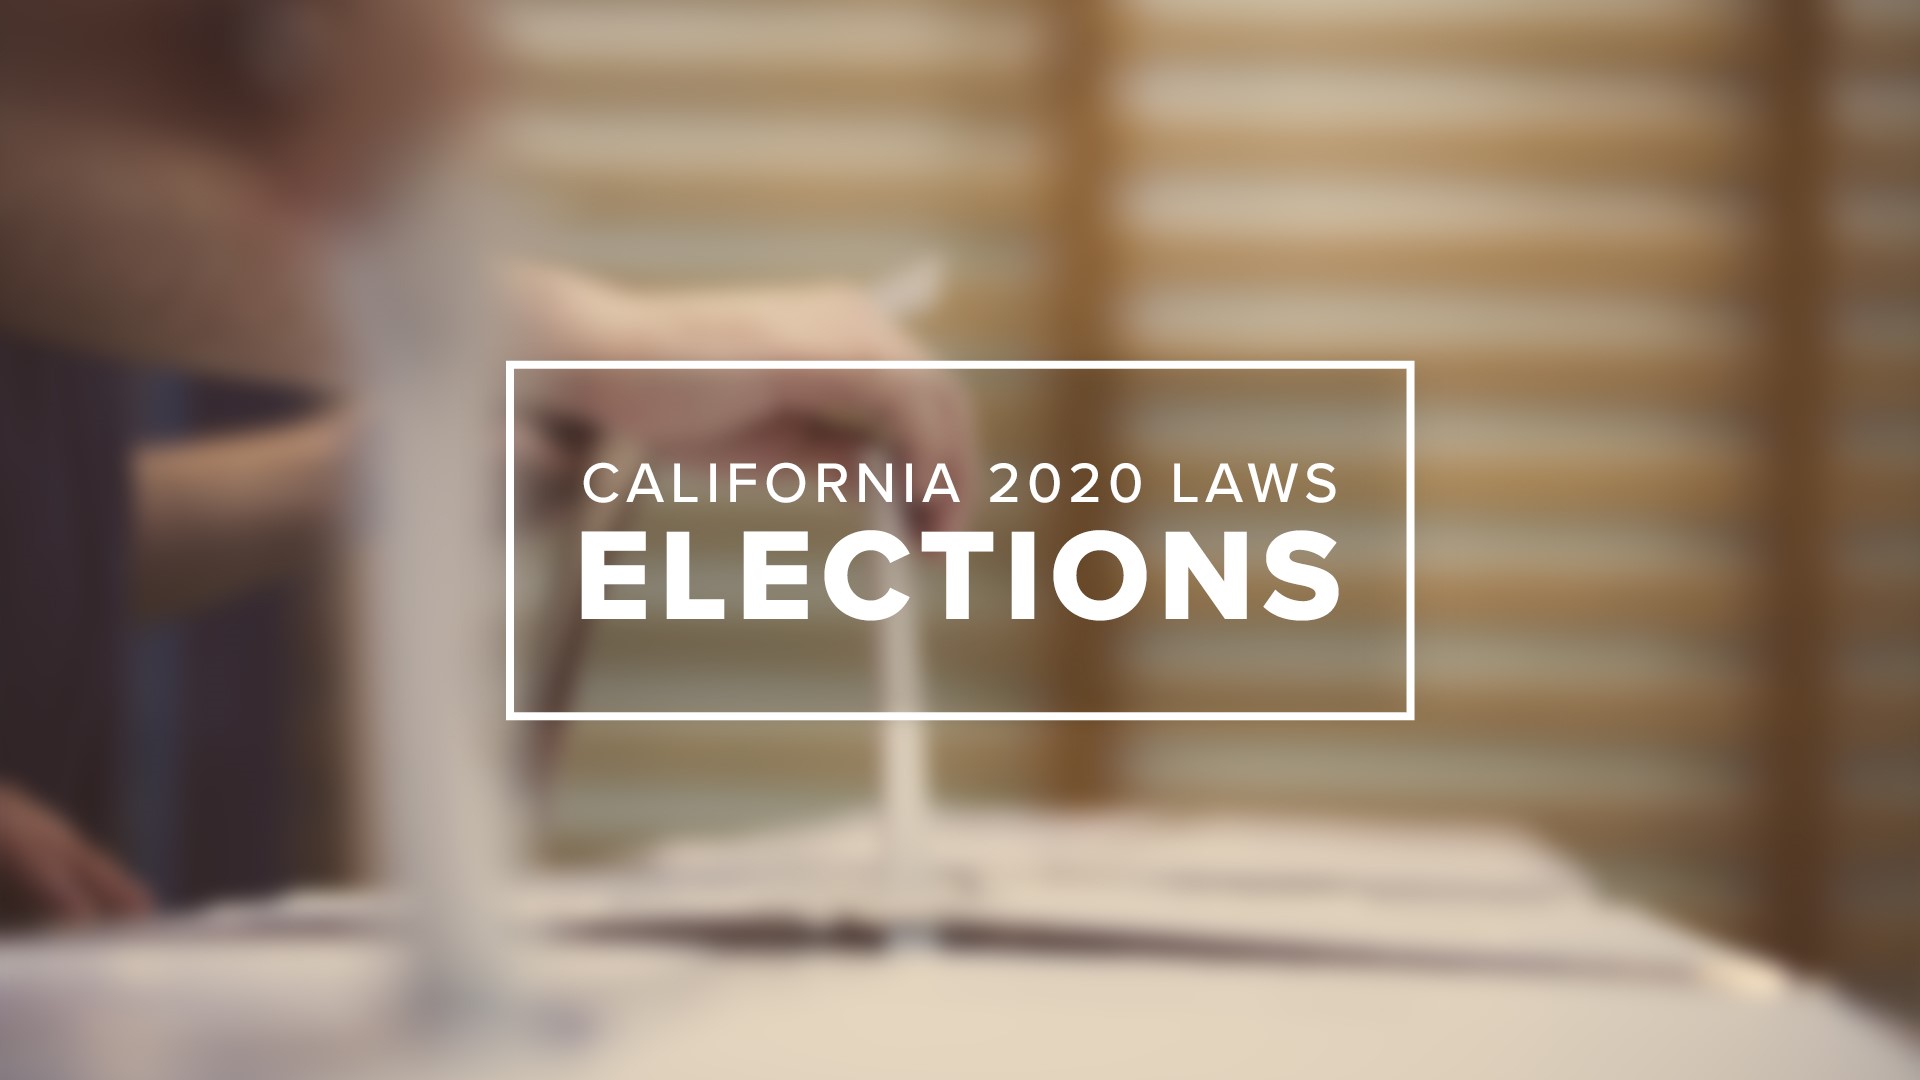 Non-citizens on government boards, impacts to vote by mail ballots, and potential polling places at college campuses are some of the new laws coming into effect.